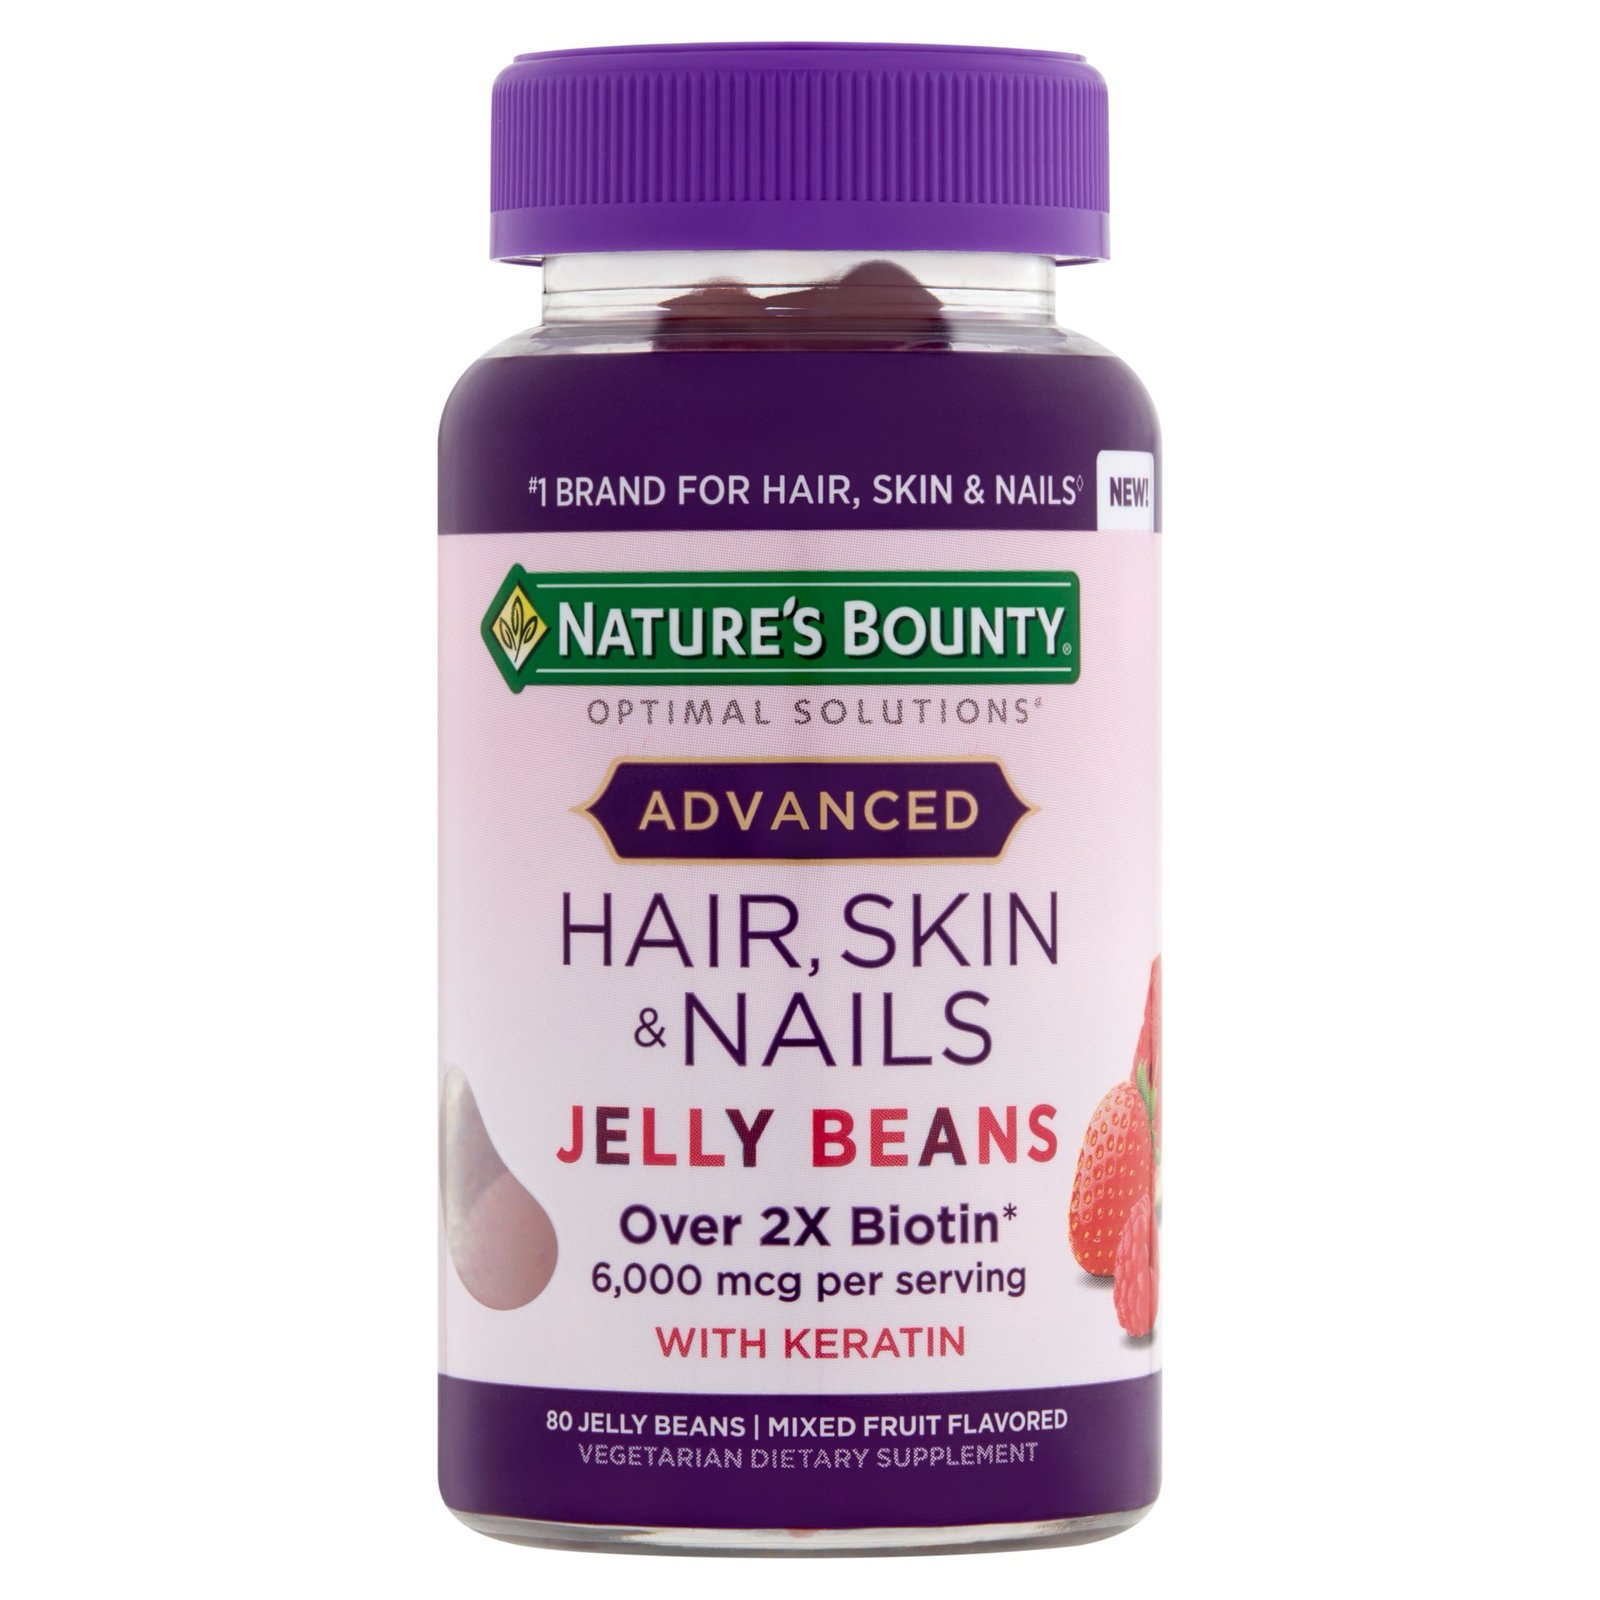 Nature's Bounty Advanced Hair, Skin & Nails Jelly Beans Dietary Supplement 80 ct